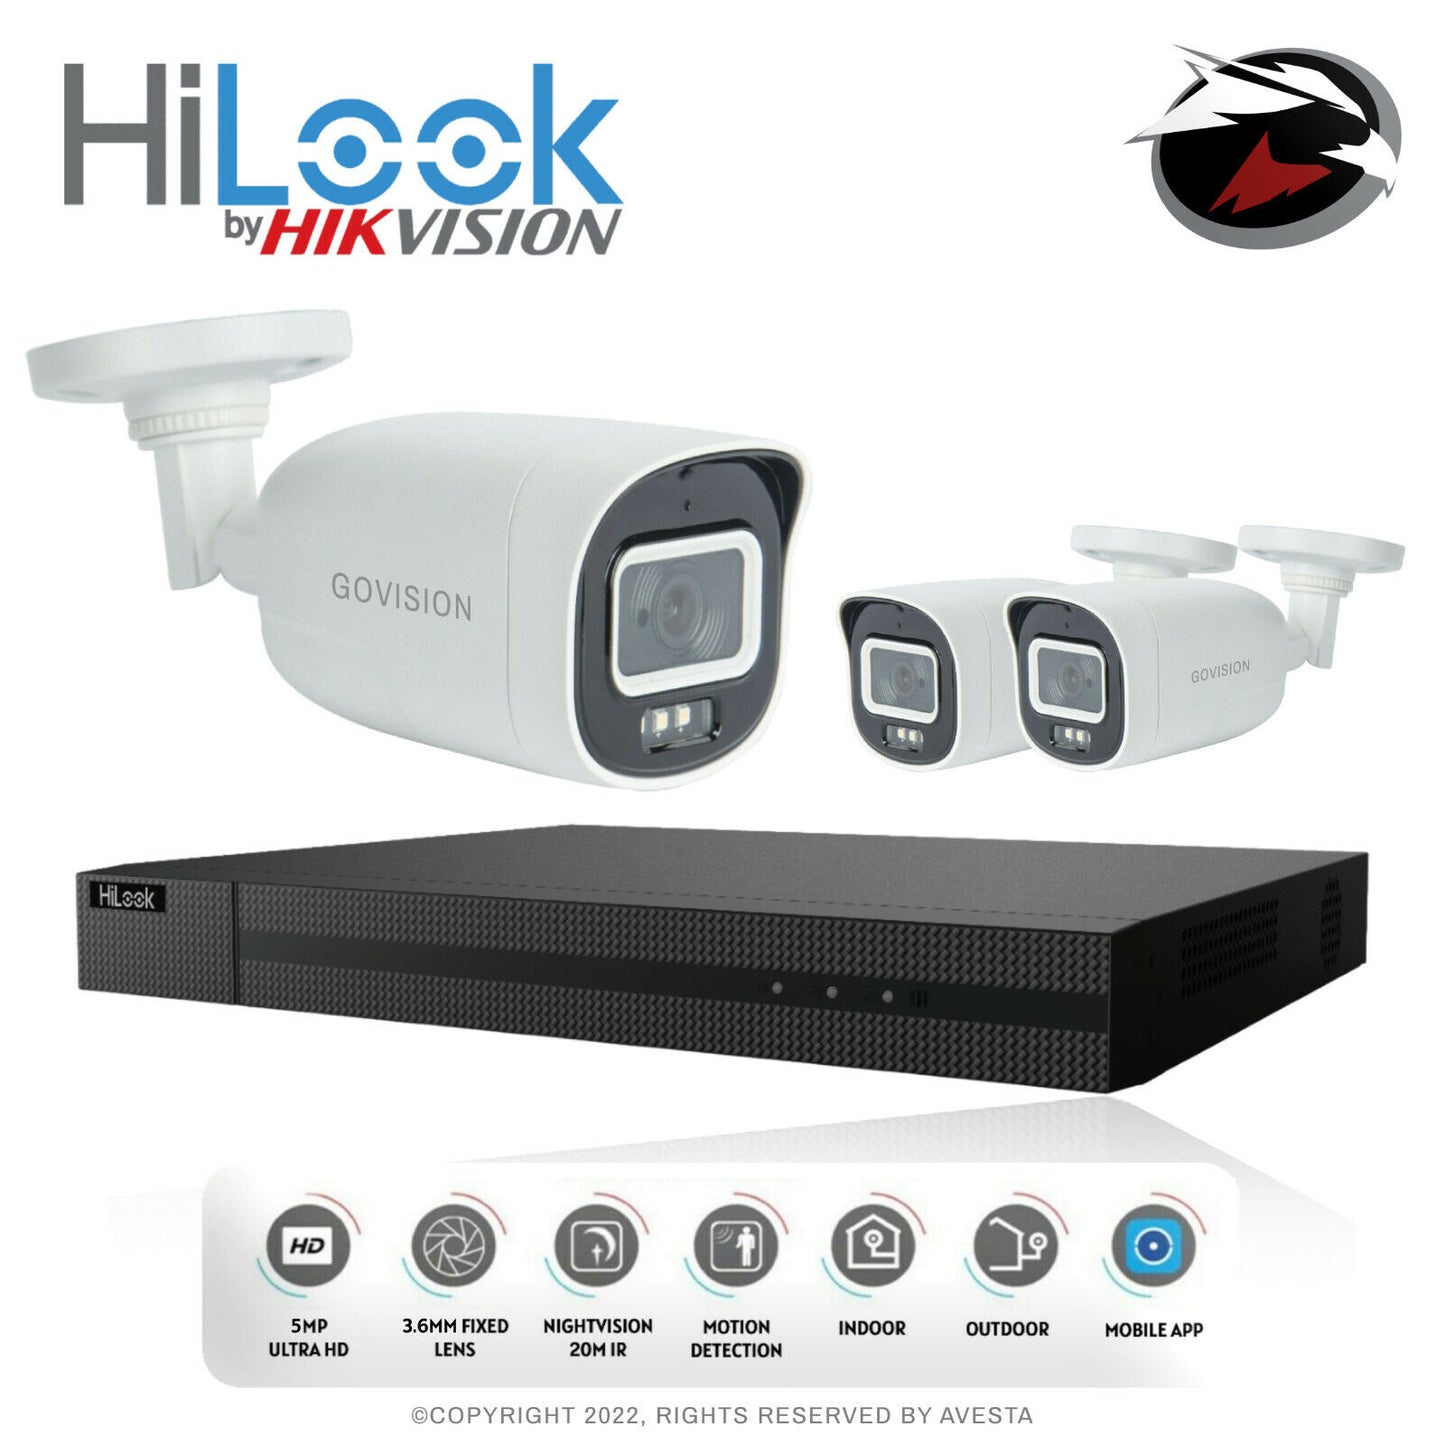 HIKVISION CCTV HD 5MP NIGHT VISION COLORFUL OUTDOOR DVR HOME SECURITY SYSTEM KIT 4CH DVR 3x Cameras (white) 1TB HDD